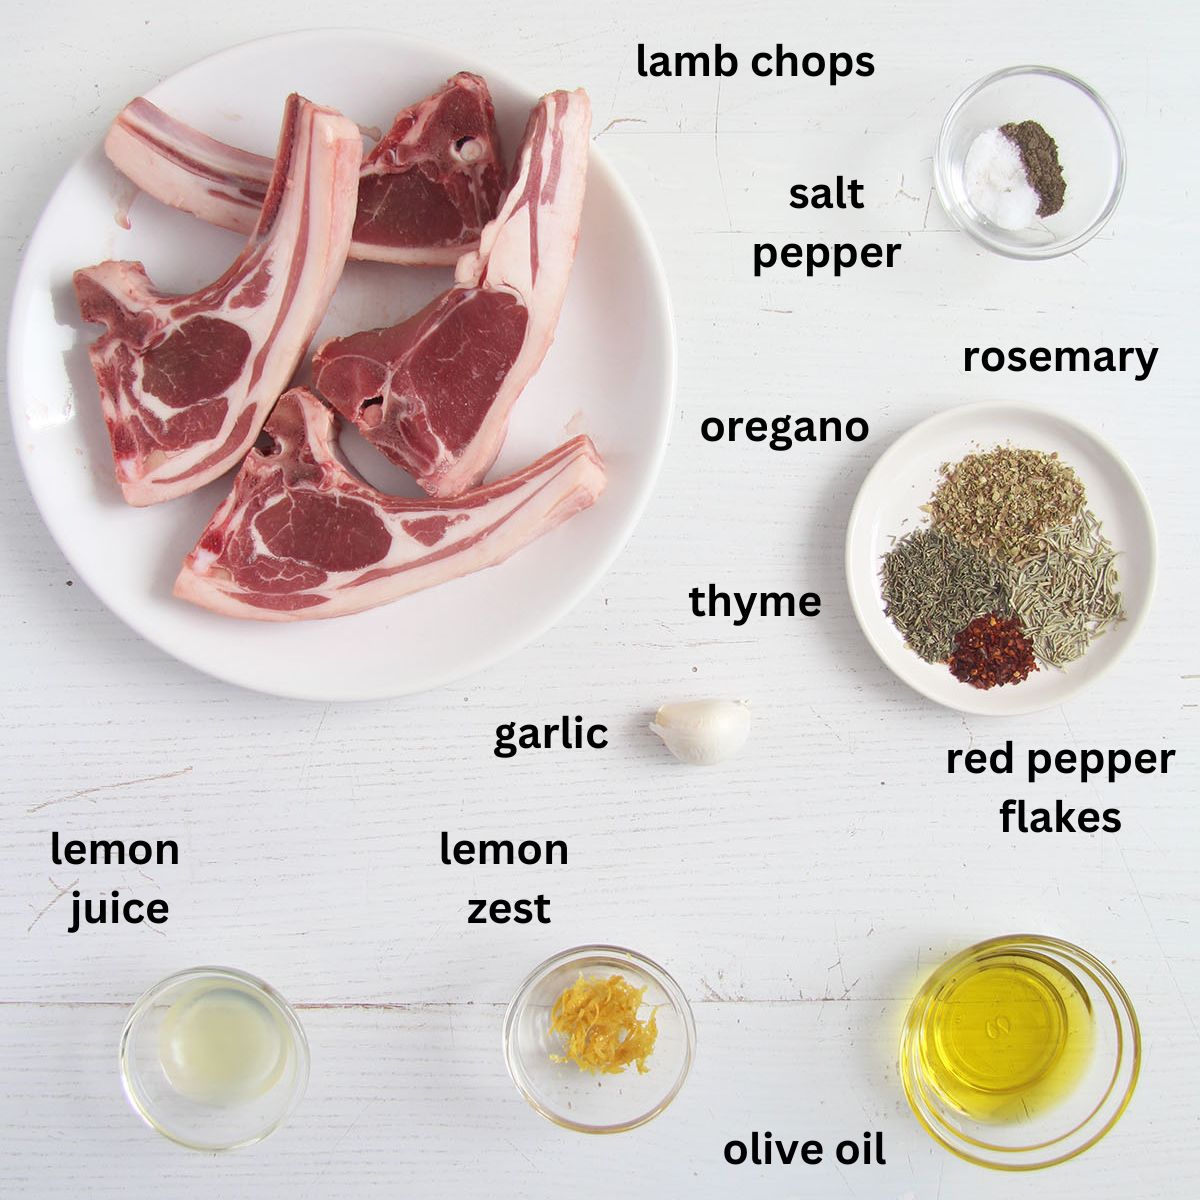 listed ingredients for lamb chops with turkish marinade.